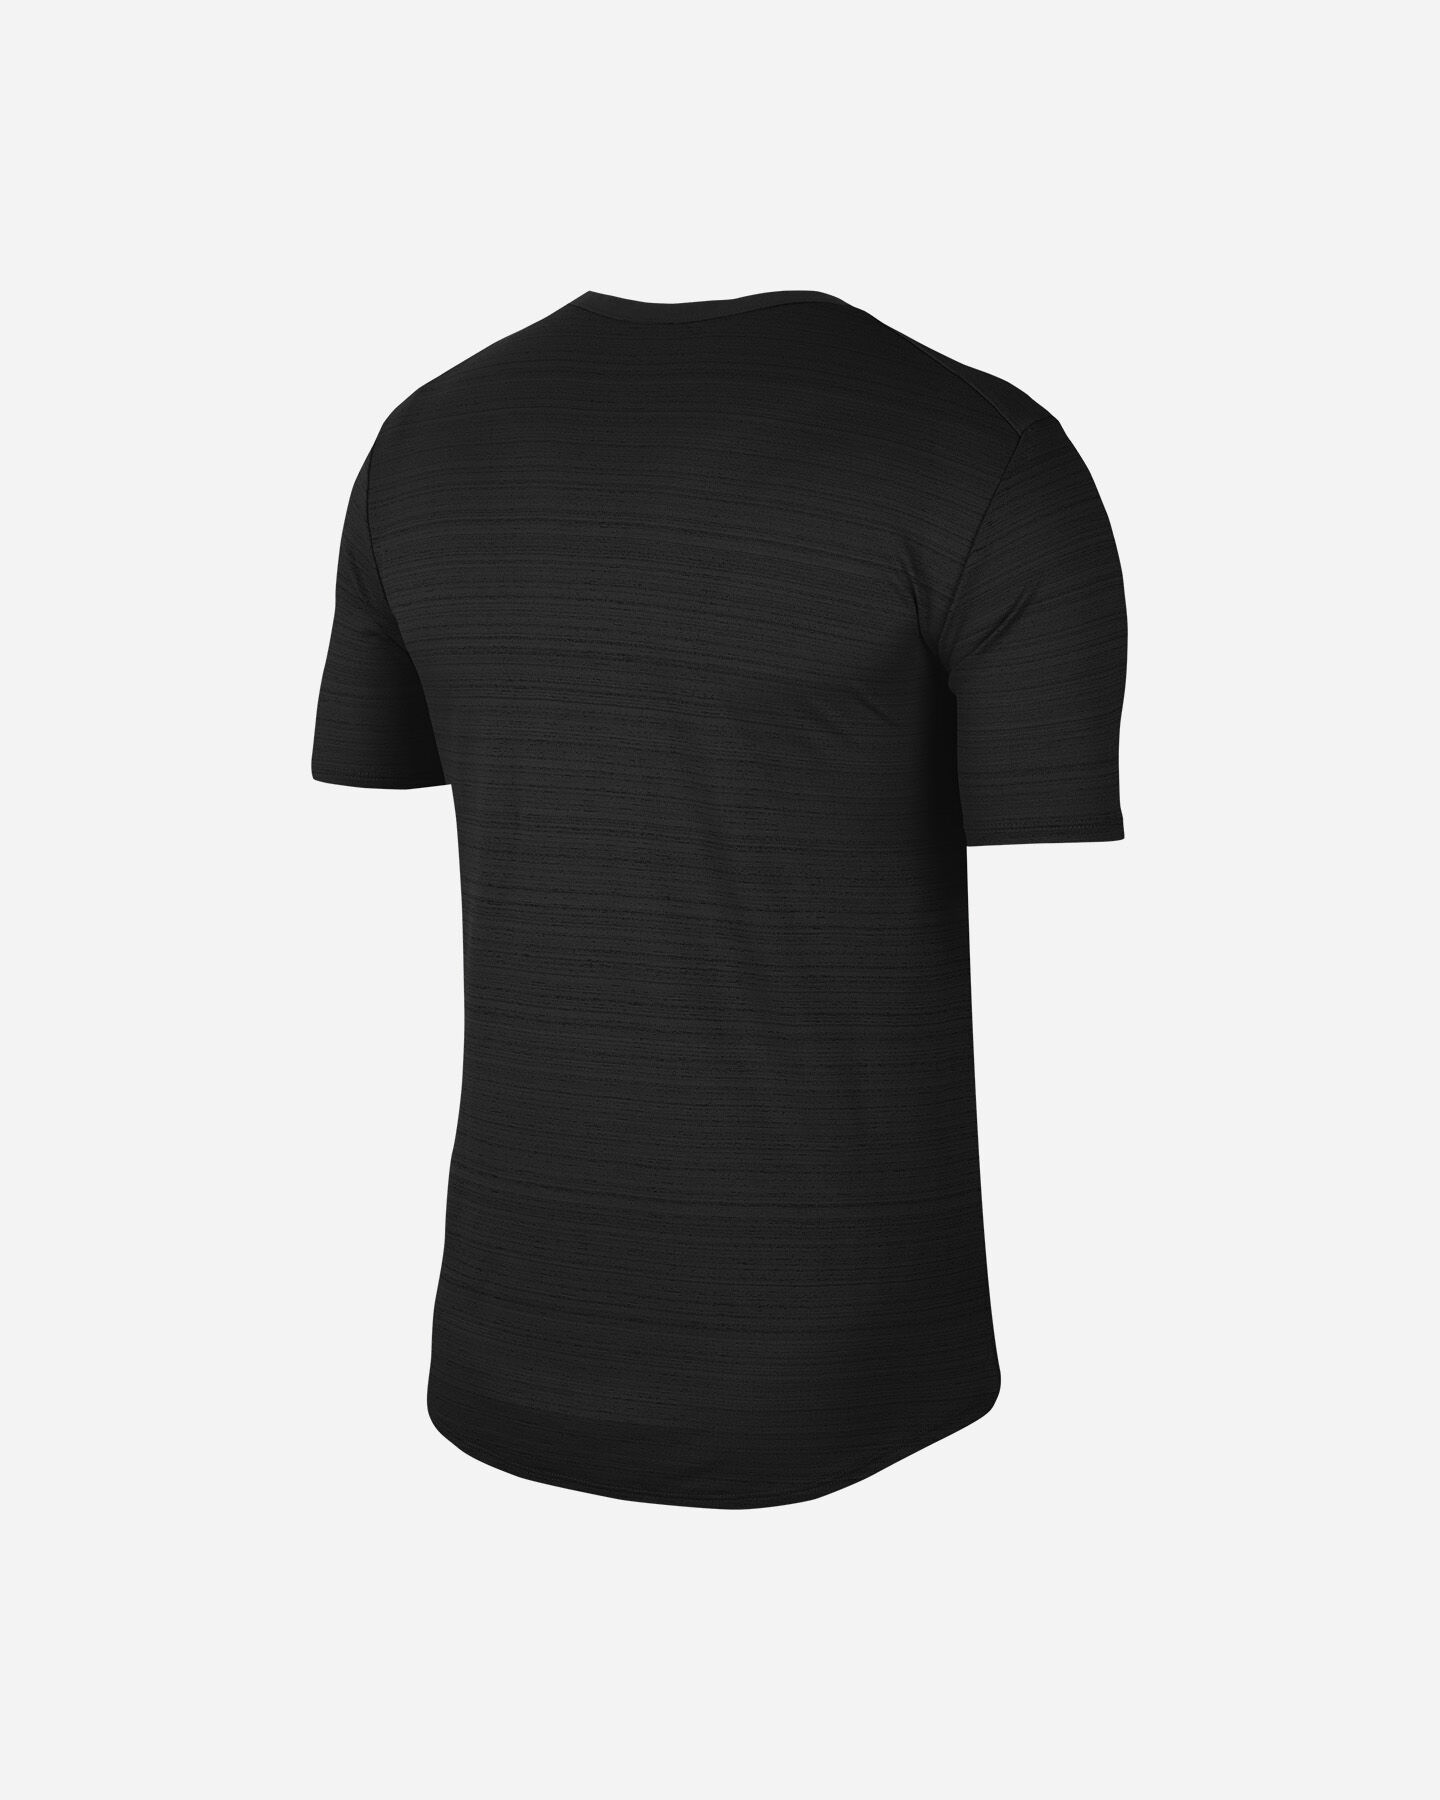  T-Shirt running NIKE DRI-FIT MILER M S5225604|010|S scatto 1